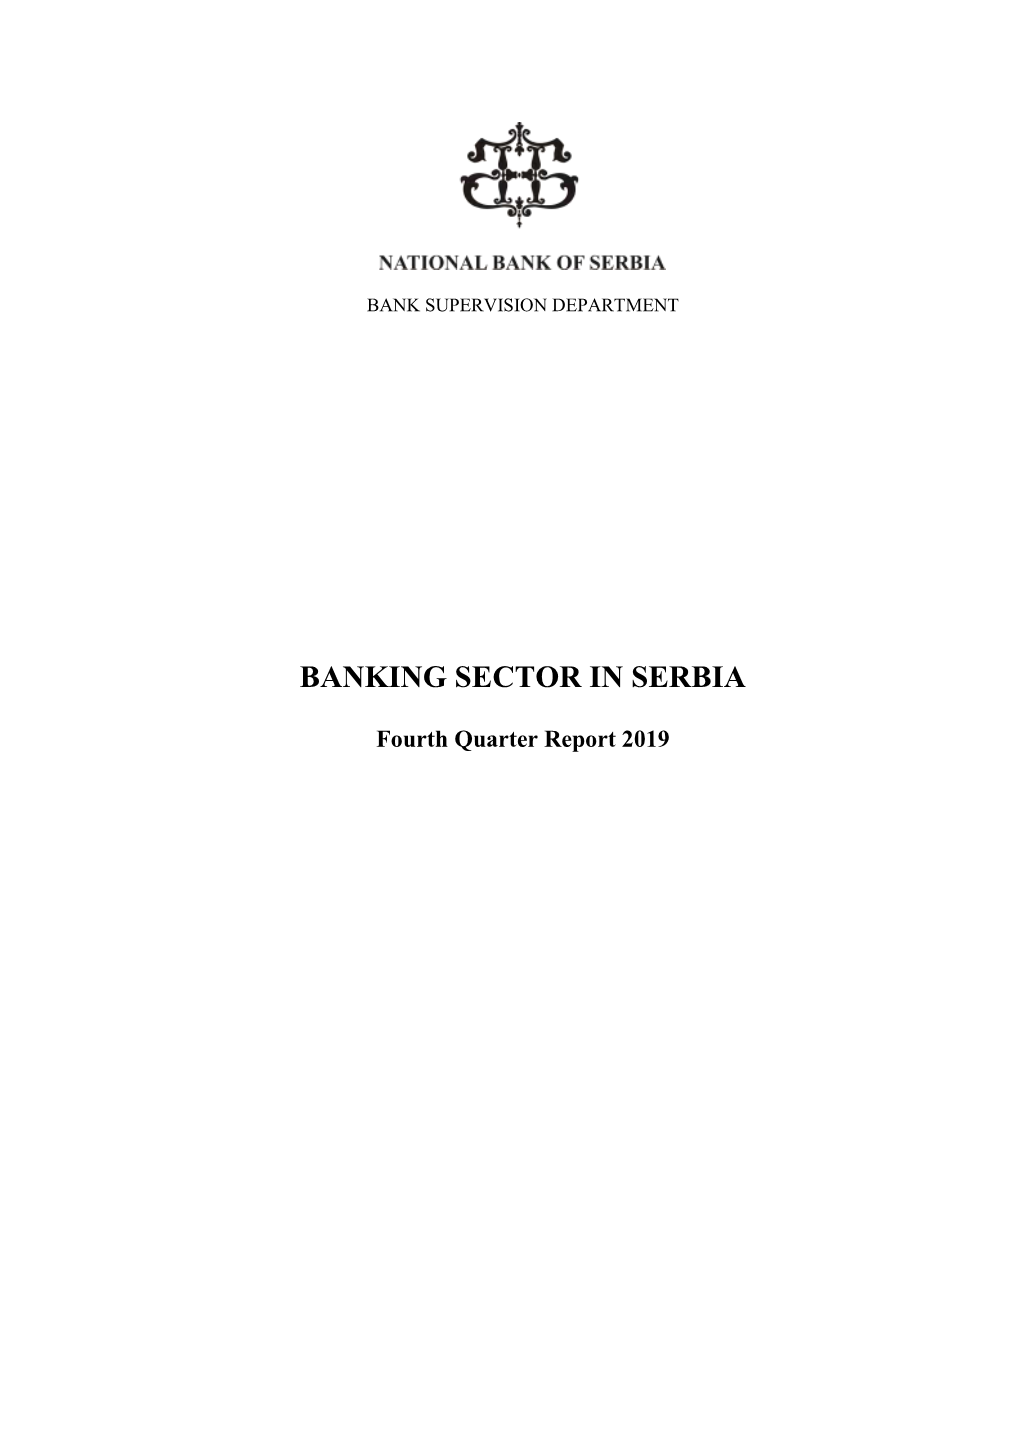 Banking Sector in Serbia